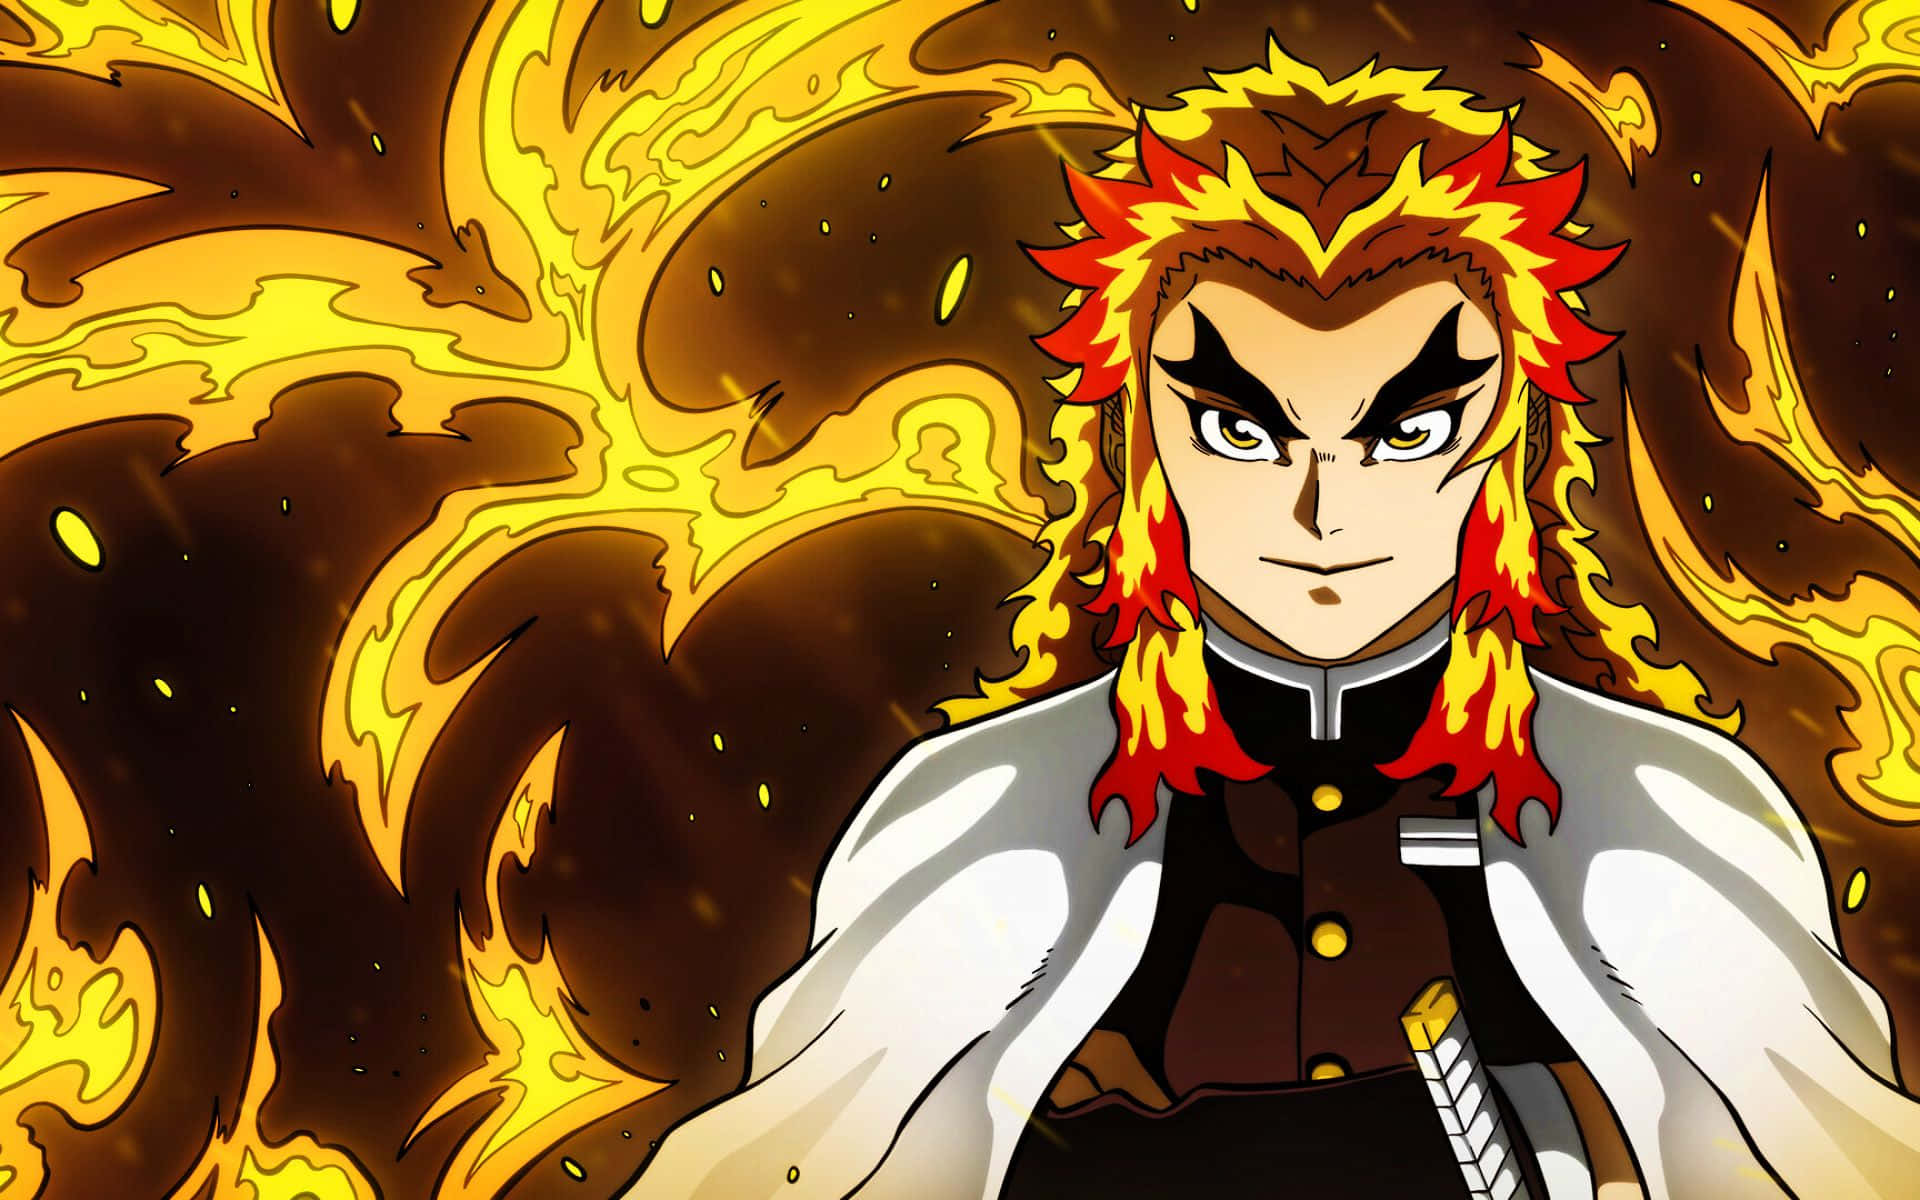 Rengoku, a fierce and resolute Demon Slayer in action.